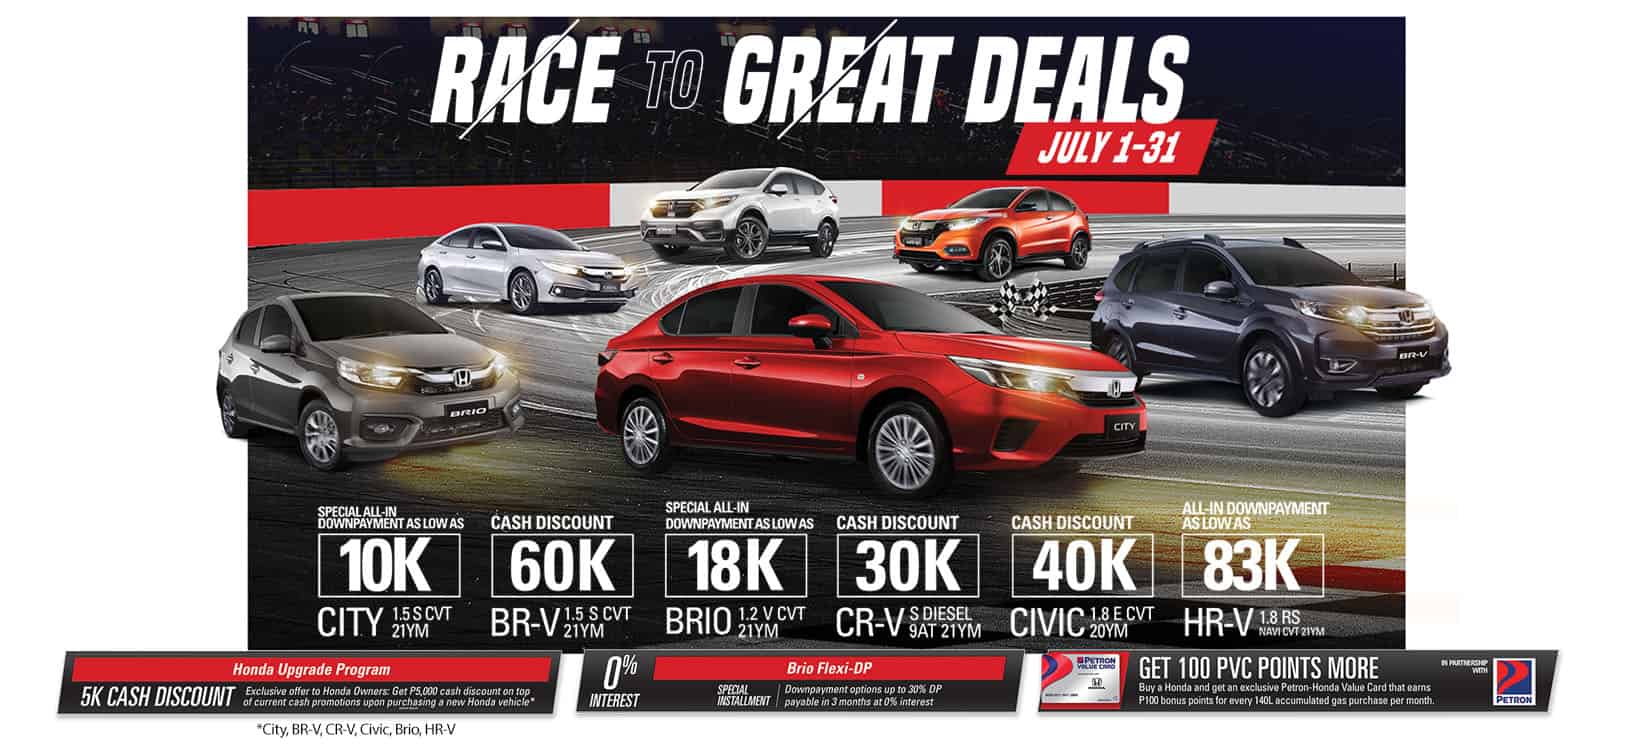 Last chance to avail Honda’s “Race to Great Deals” promo this July